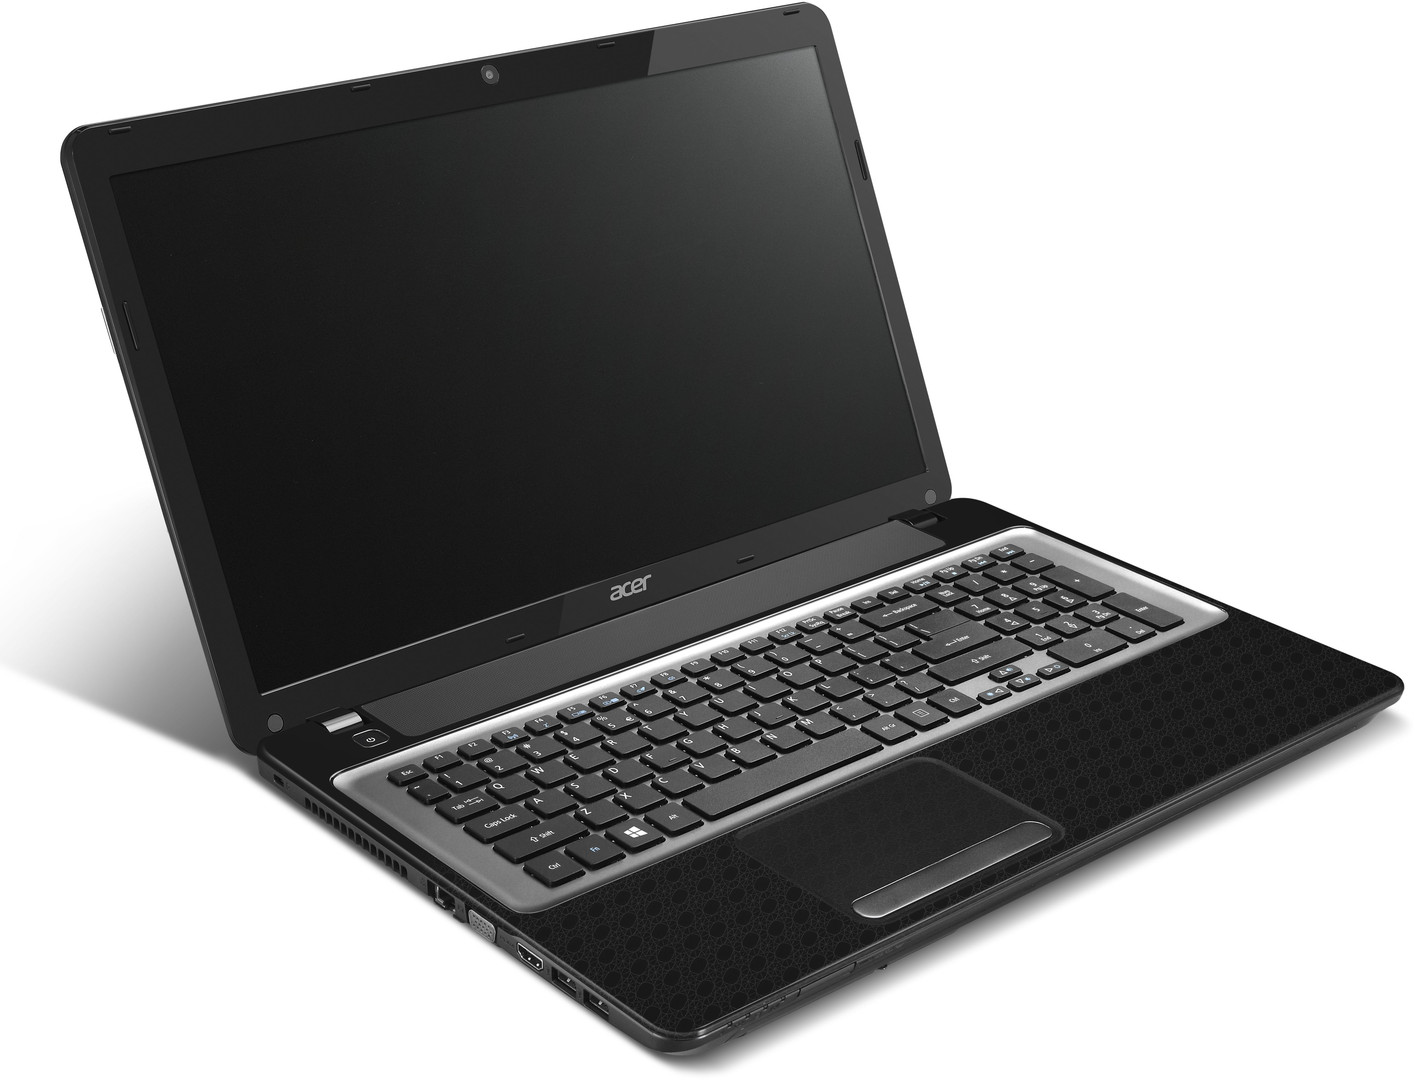 Acer Travelmate 4101lmi Drivers Download